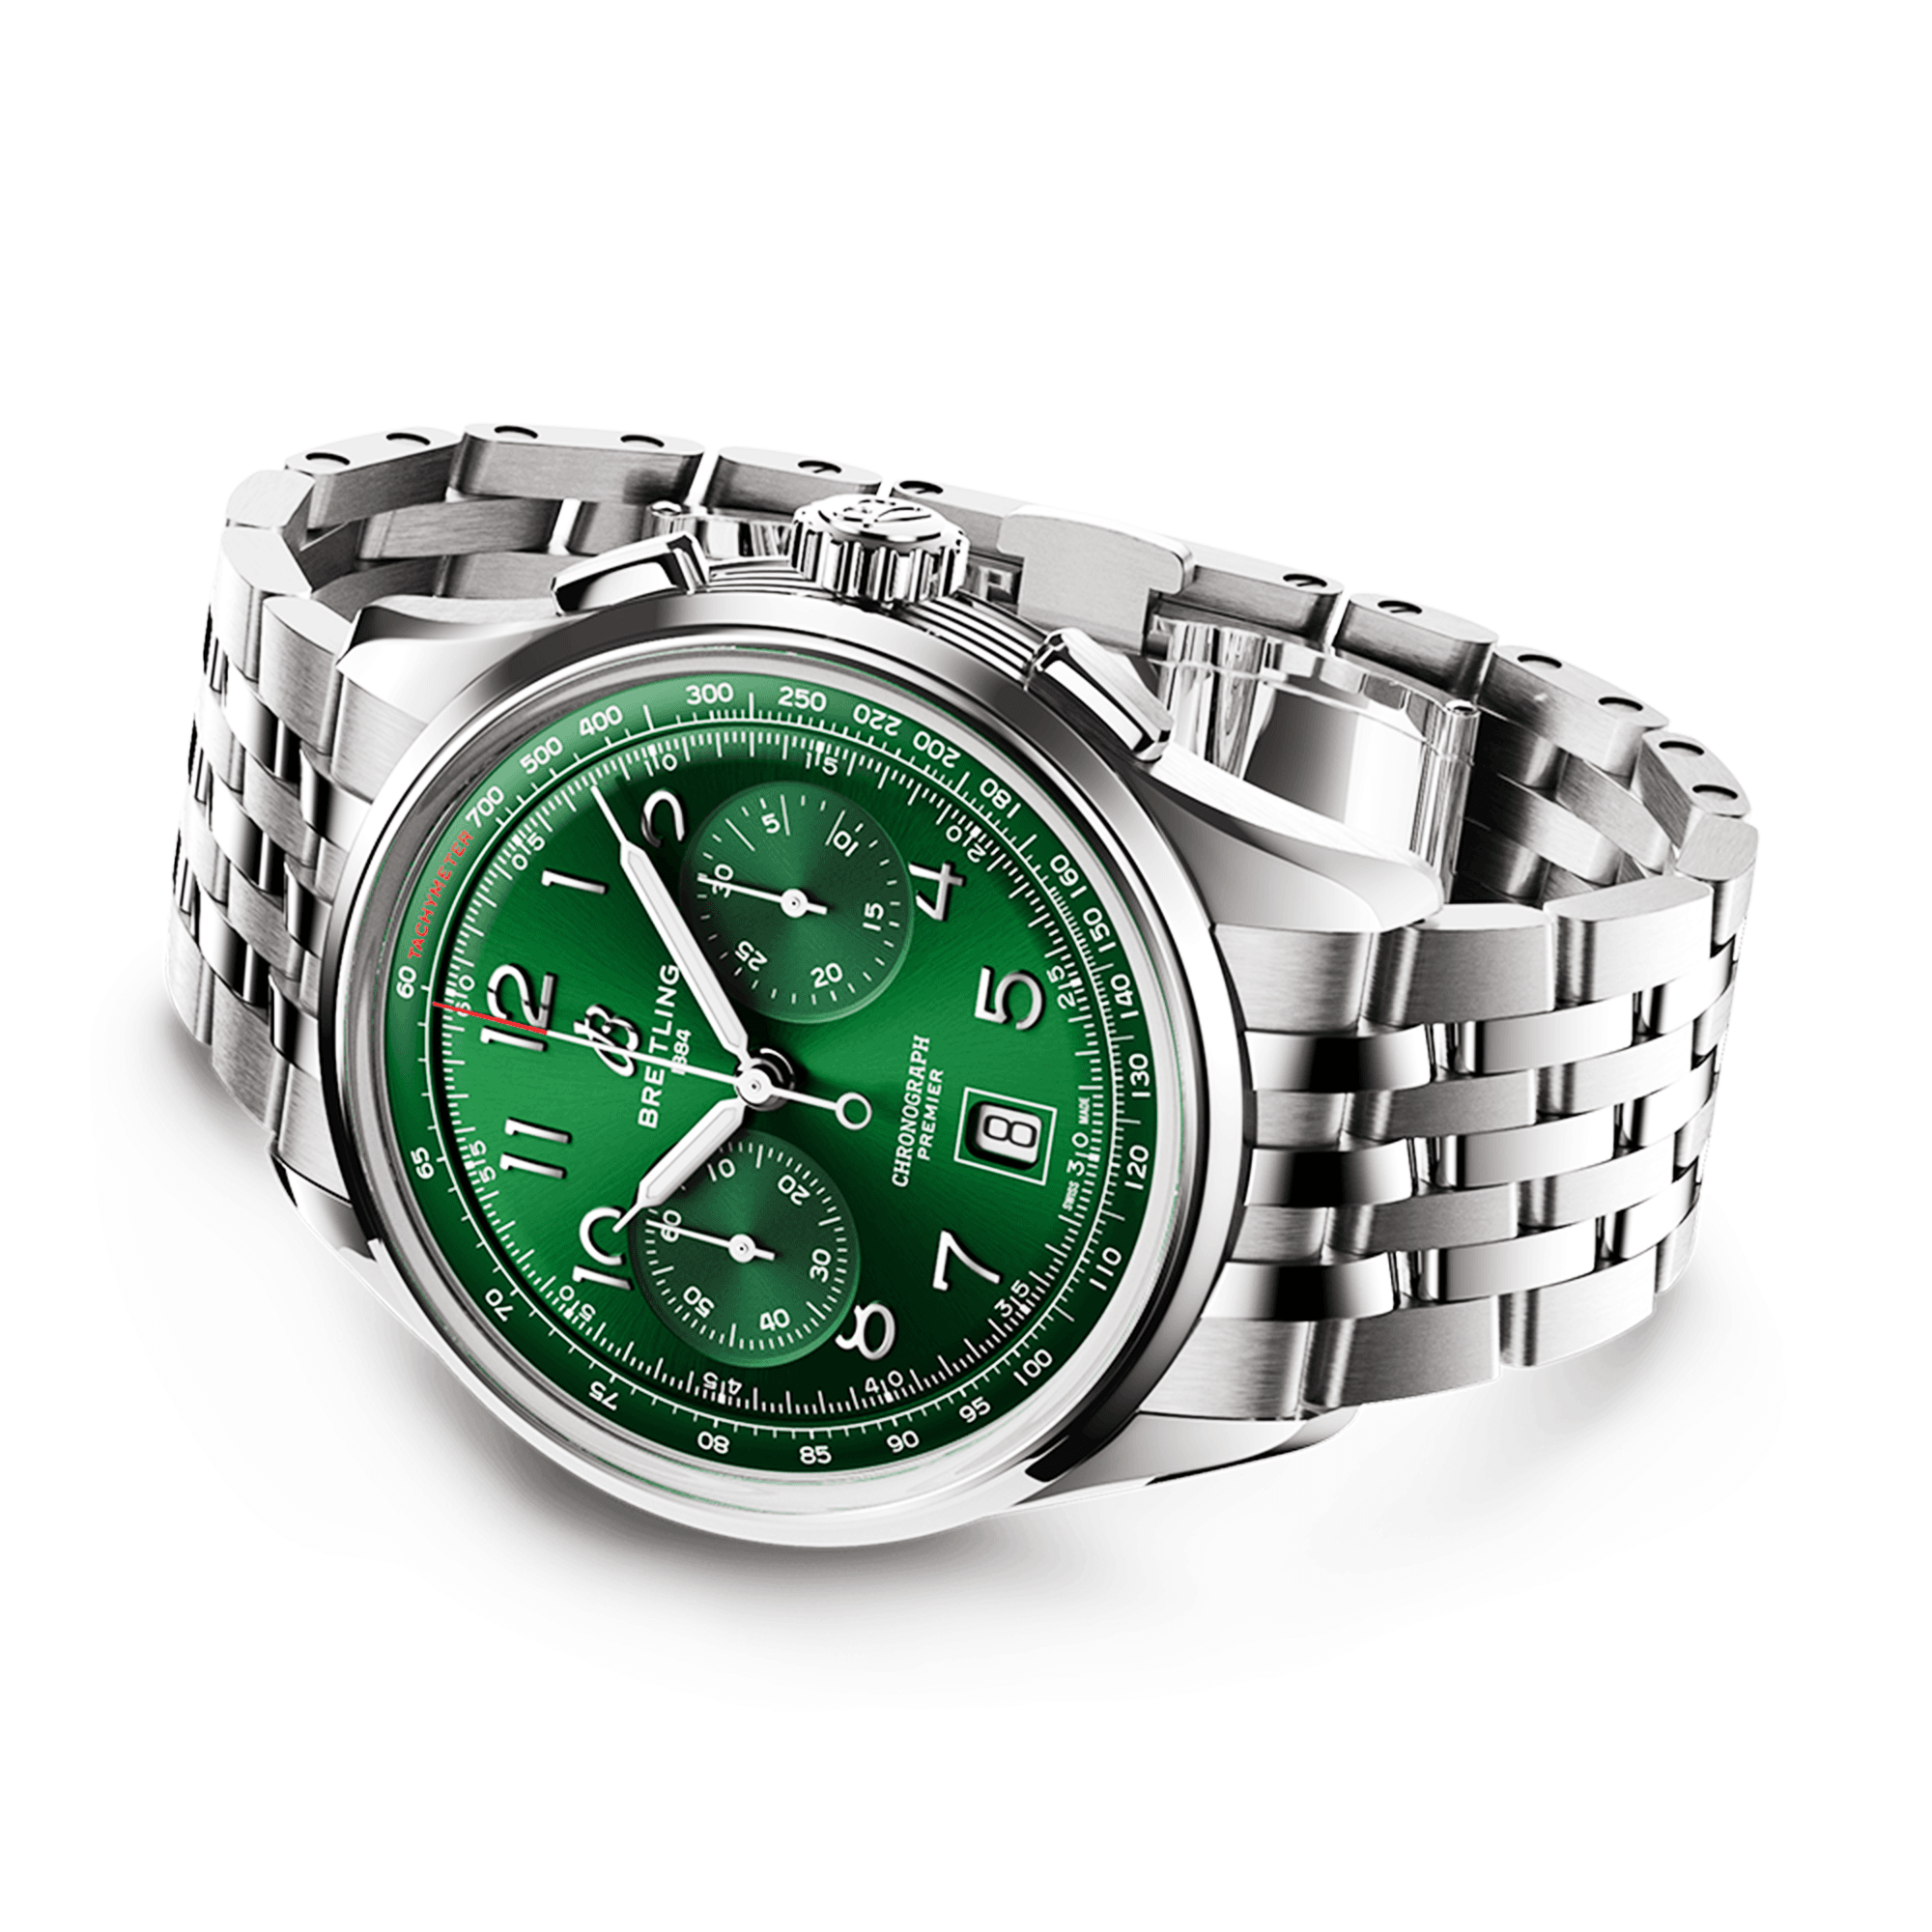 Premier B01 42mm Green Sunray Dial Automatic Chronograph Watch